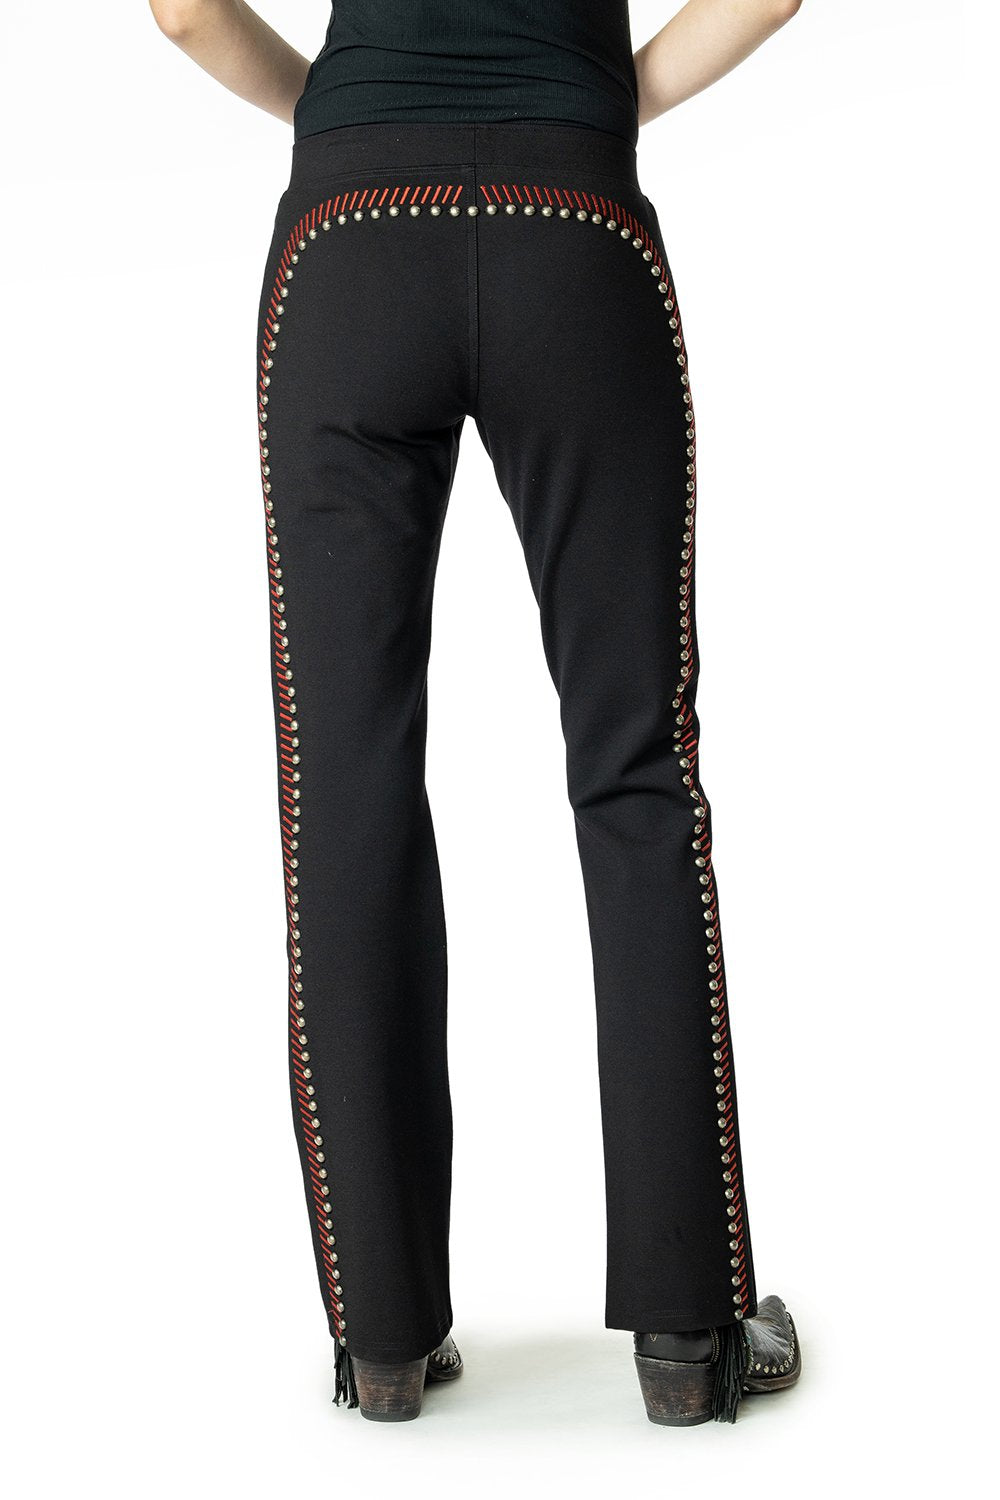 Load image into Gallery viewer, Double D Ranch Long Black Train Pant in Racehorse Red6Whiskey Nashville Fall 2020 P478
